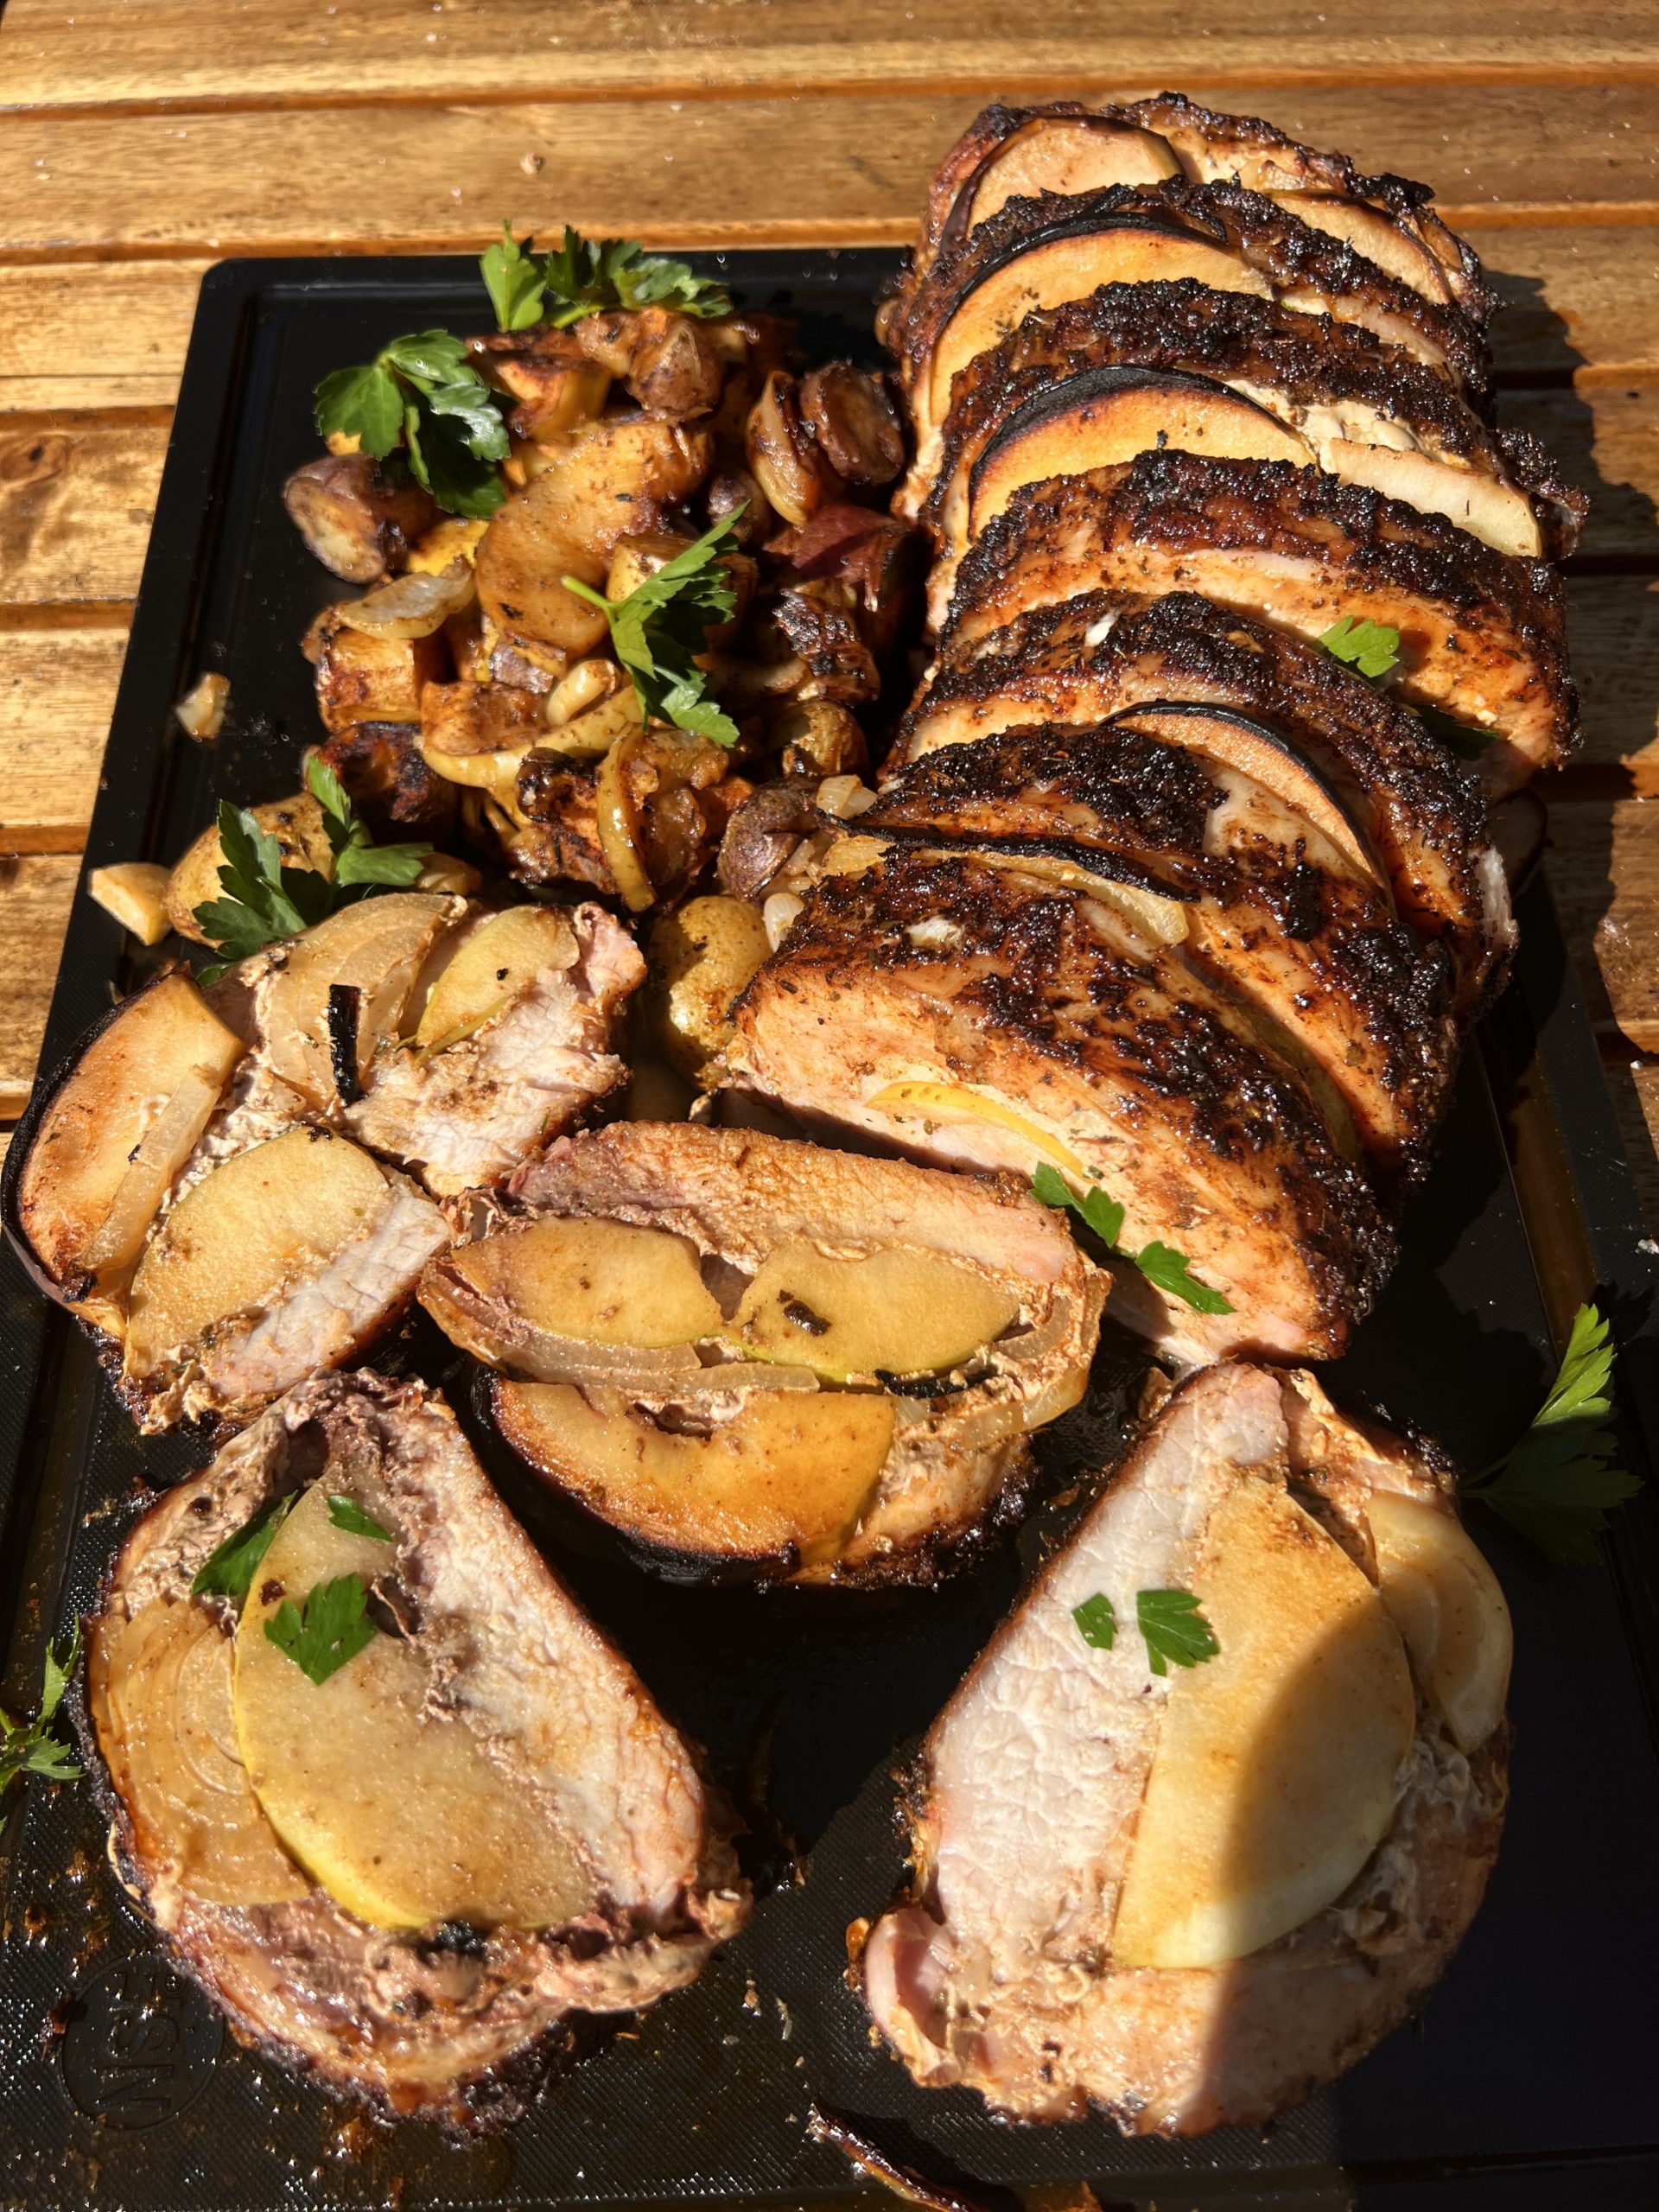 Miguel’s Green Apple and Onion Stuffed Pork Loin